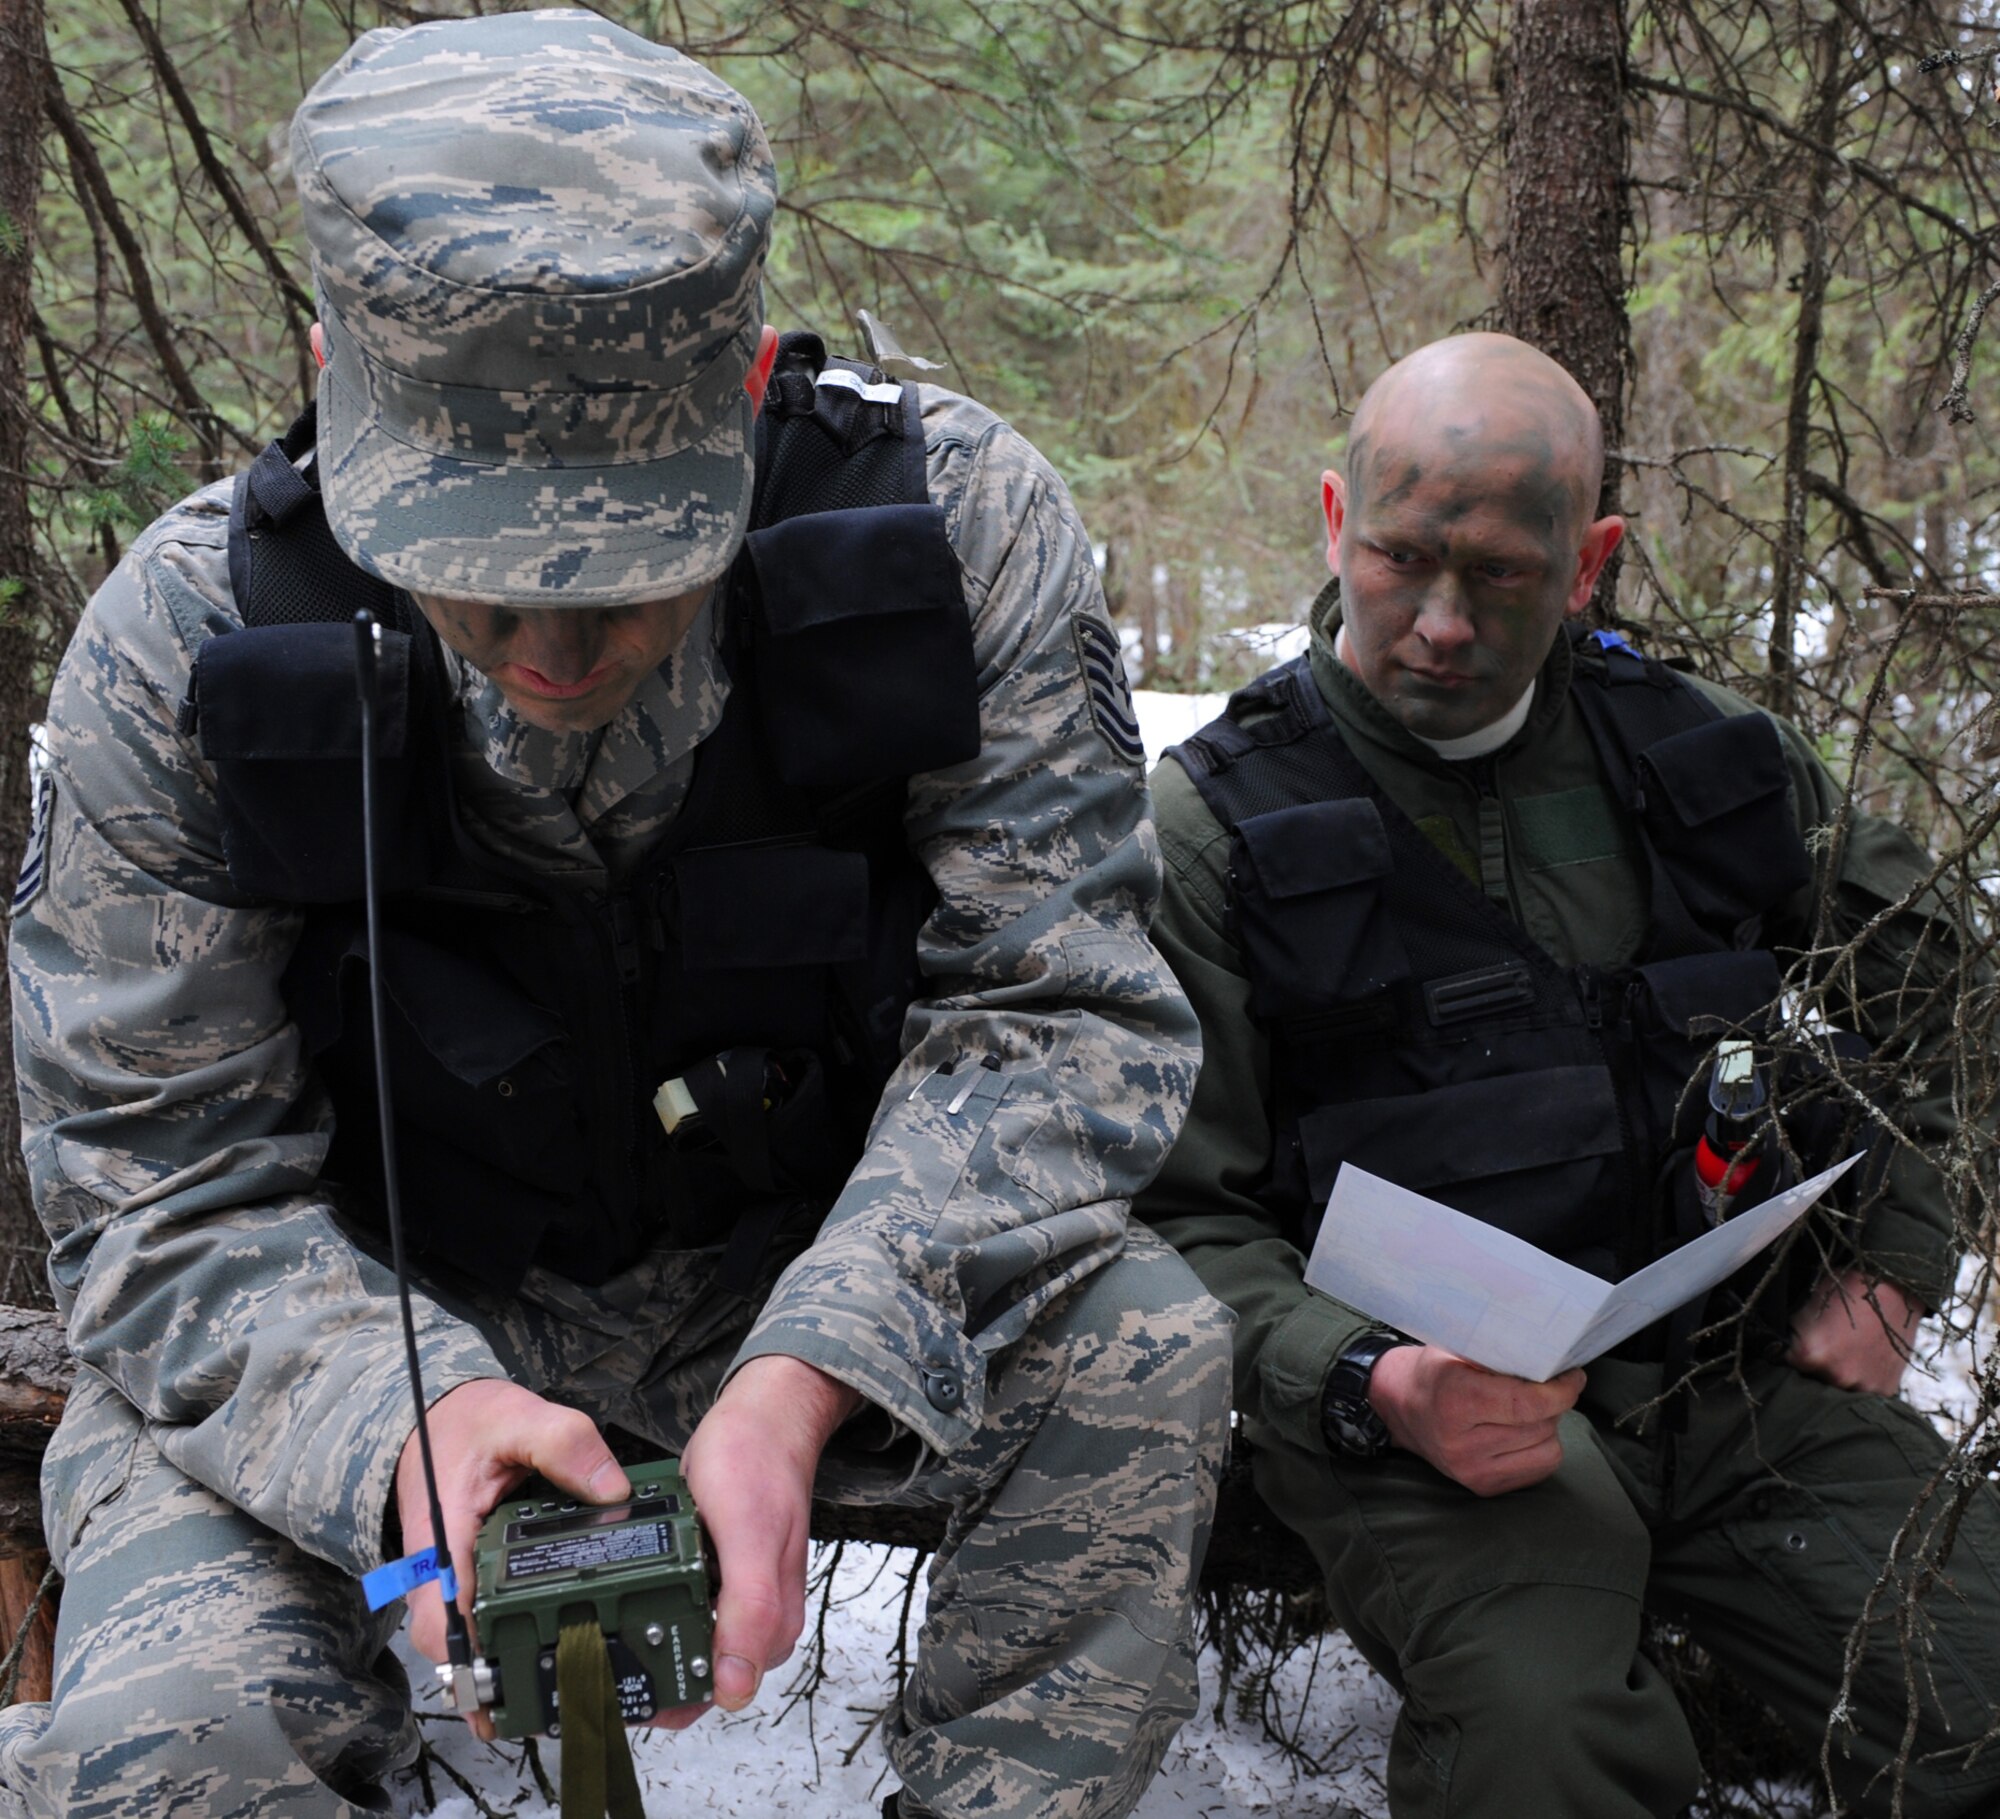 ELMENDORF AIR FORCE BASE, Alaska -- Tech. Sgt. Andrew Reich and Master Sgt. Andrew Schultz coordinate back and forth on their radio to complete land navigation training April 2.  Survival, evasion, resistance and escape field training operations training covers hands on learning with maps, GPS units and radios. Sergeant Reich and Sergeant Schultz are communications system operators with the 962nd Airborne Air Control Squadron.  (Air Force photo by Senior Airman Cynthia Spalding)